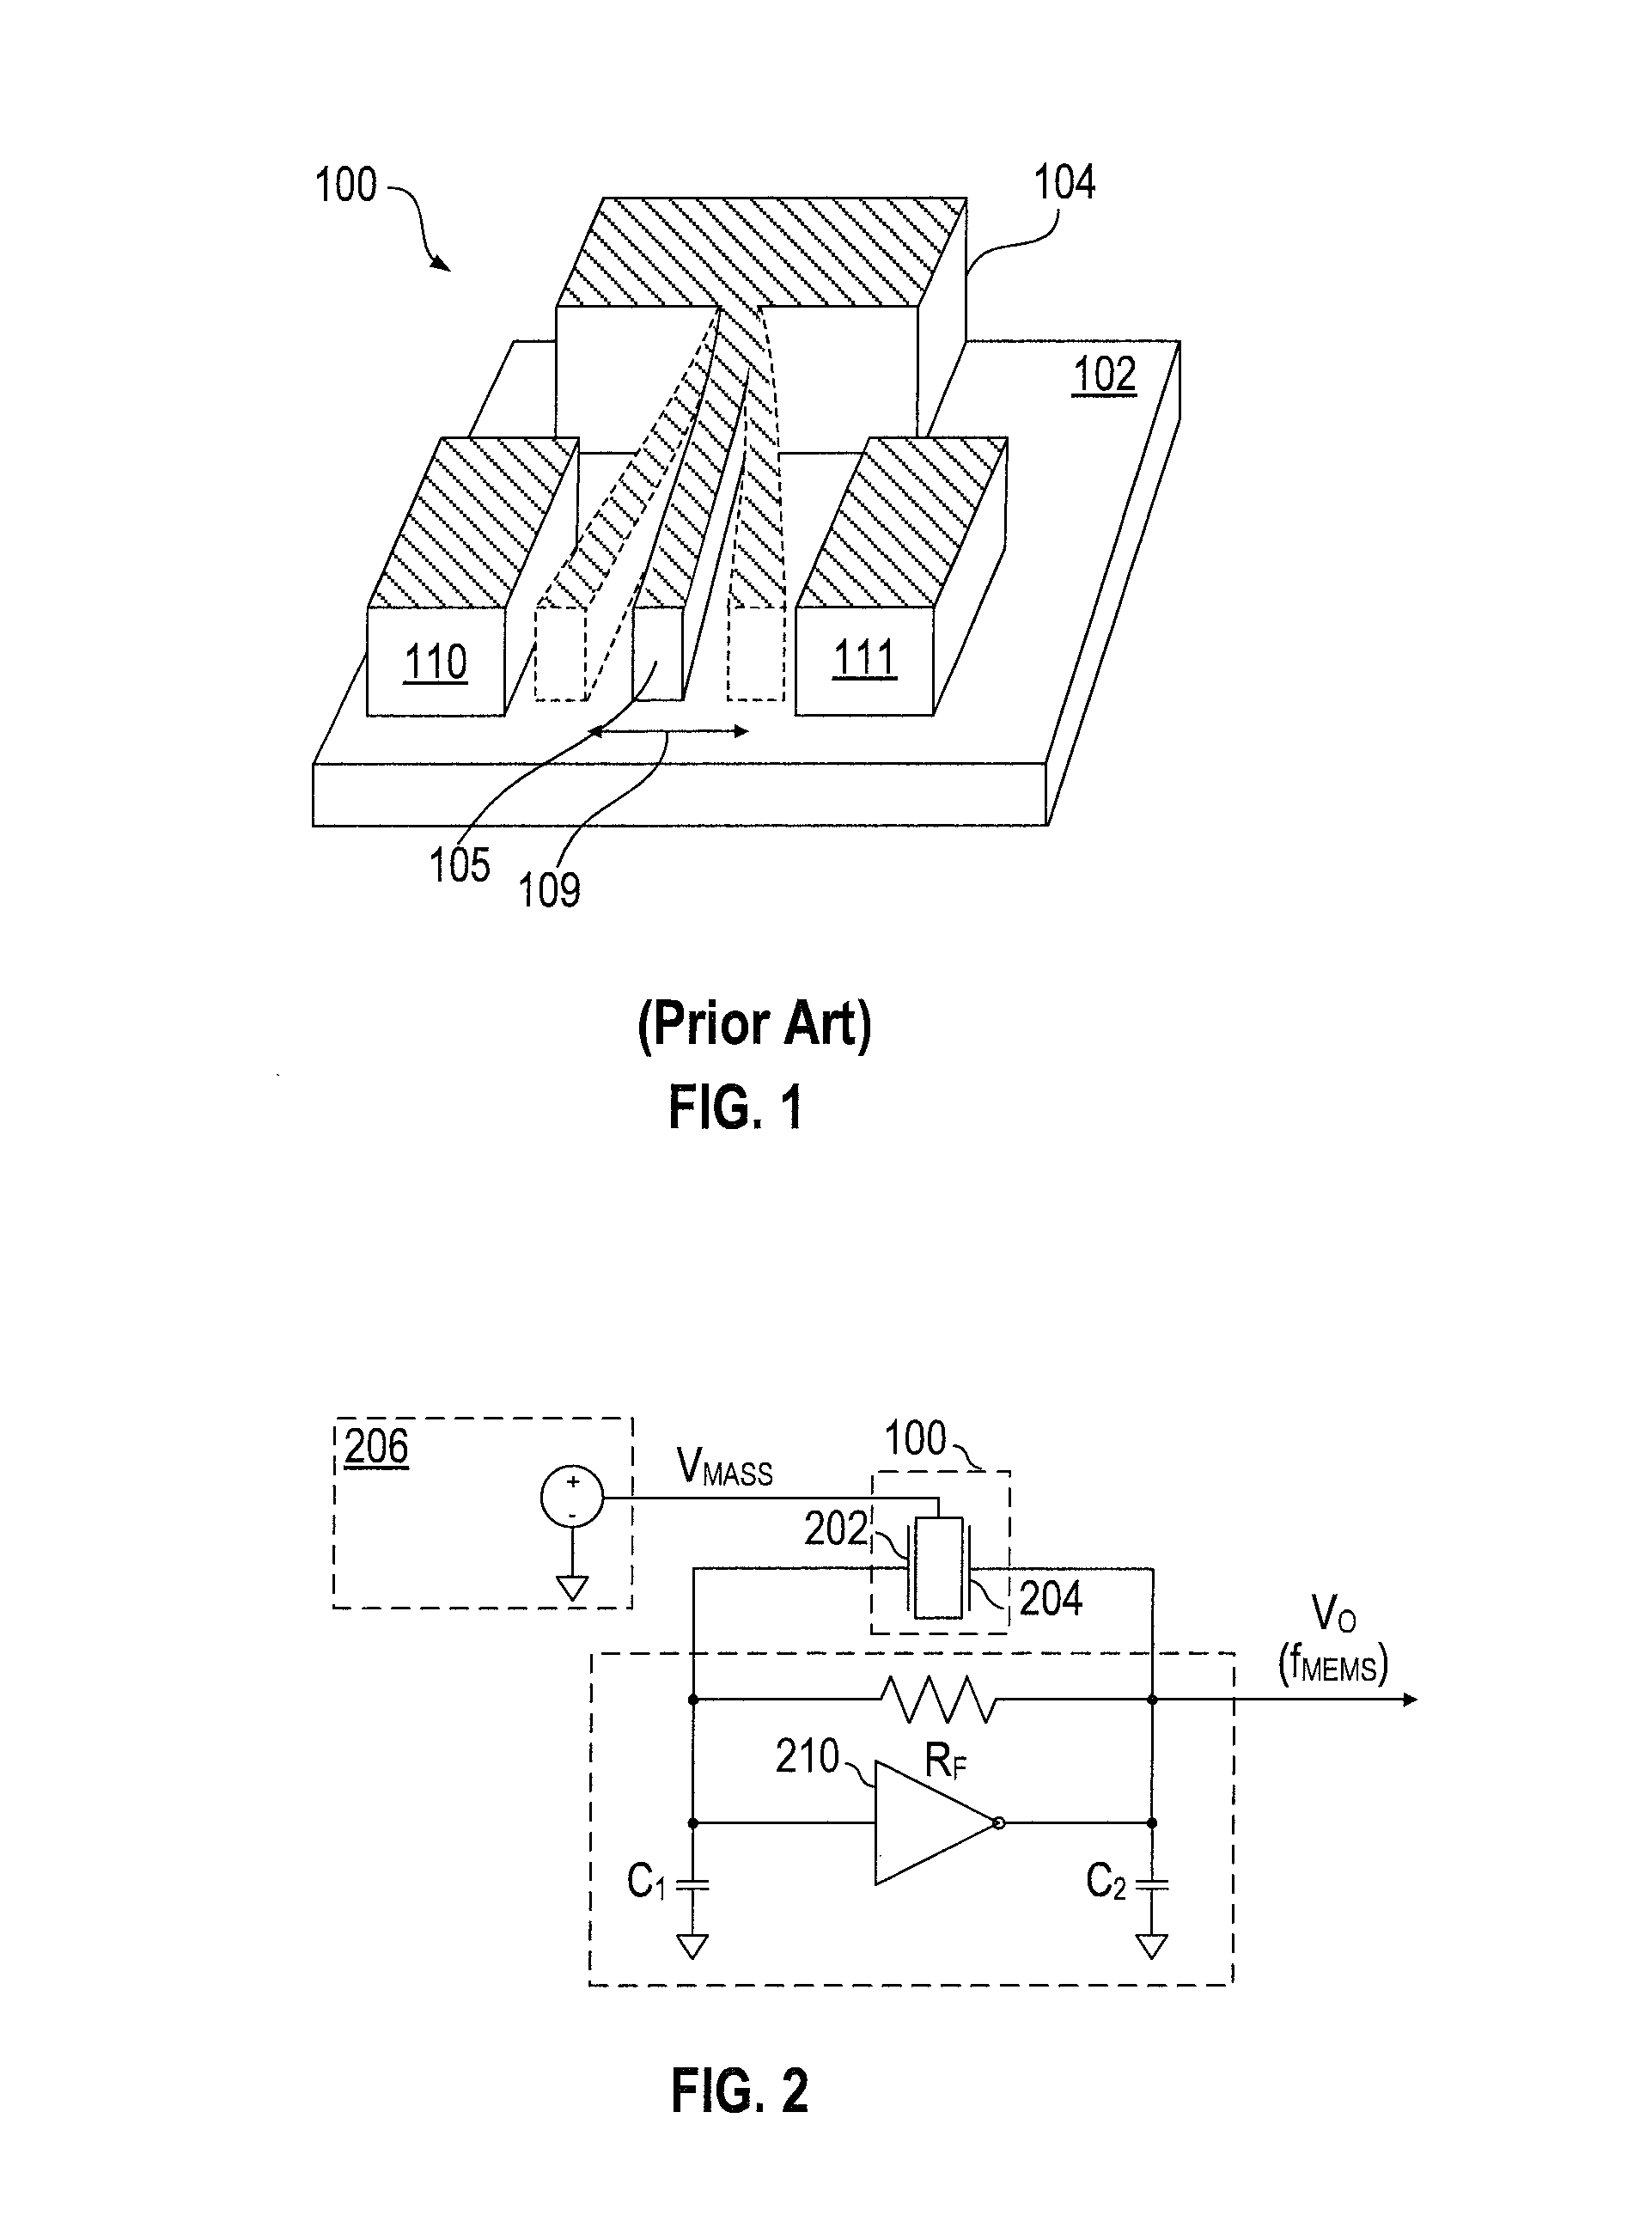 Suspended passive element for MEMS devices